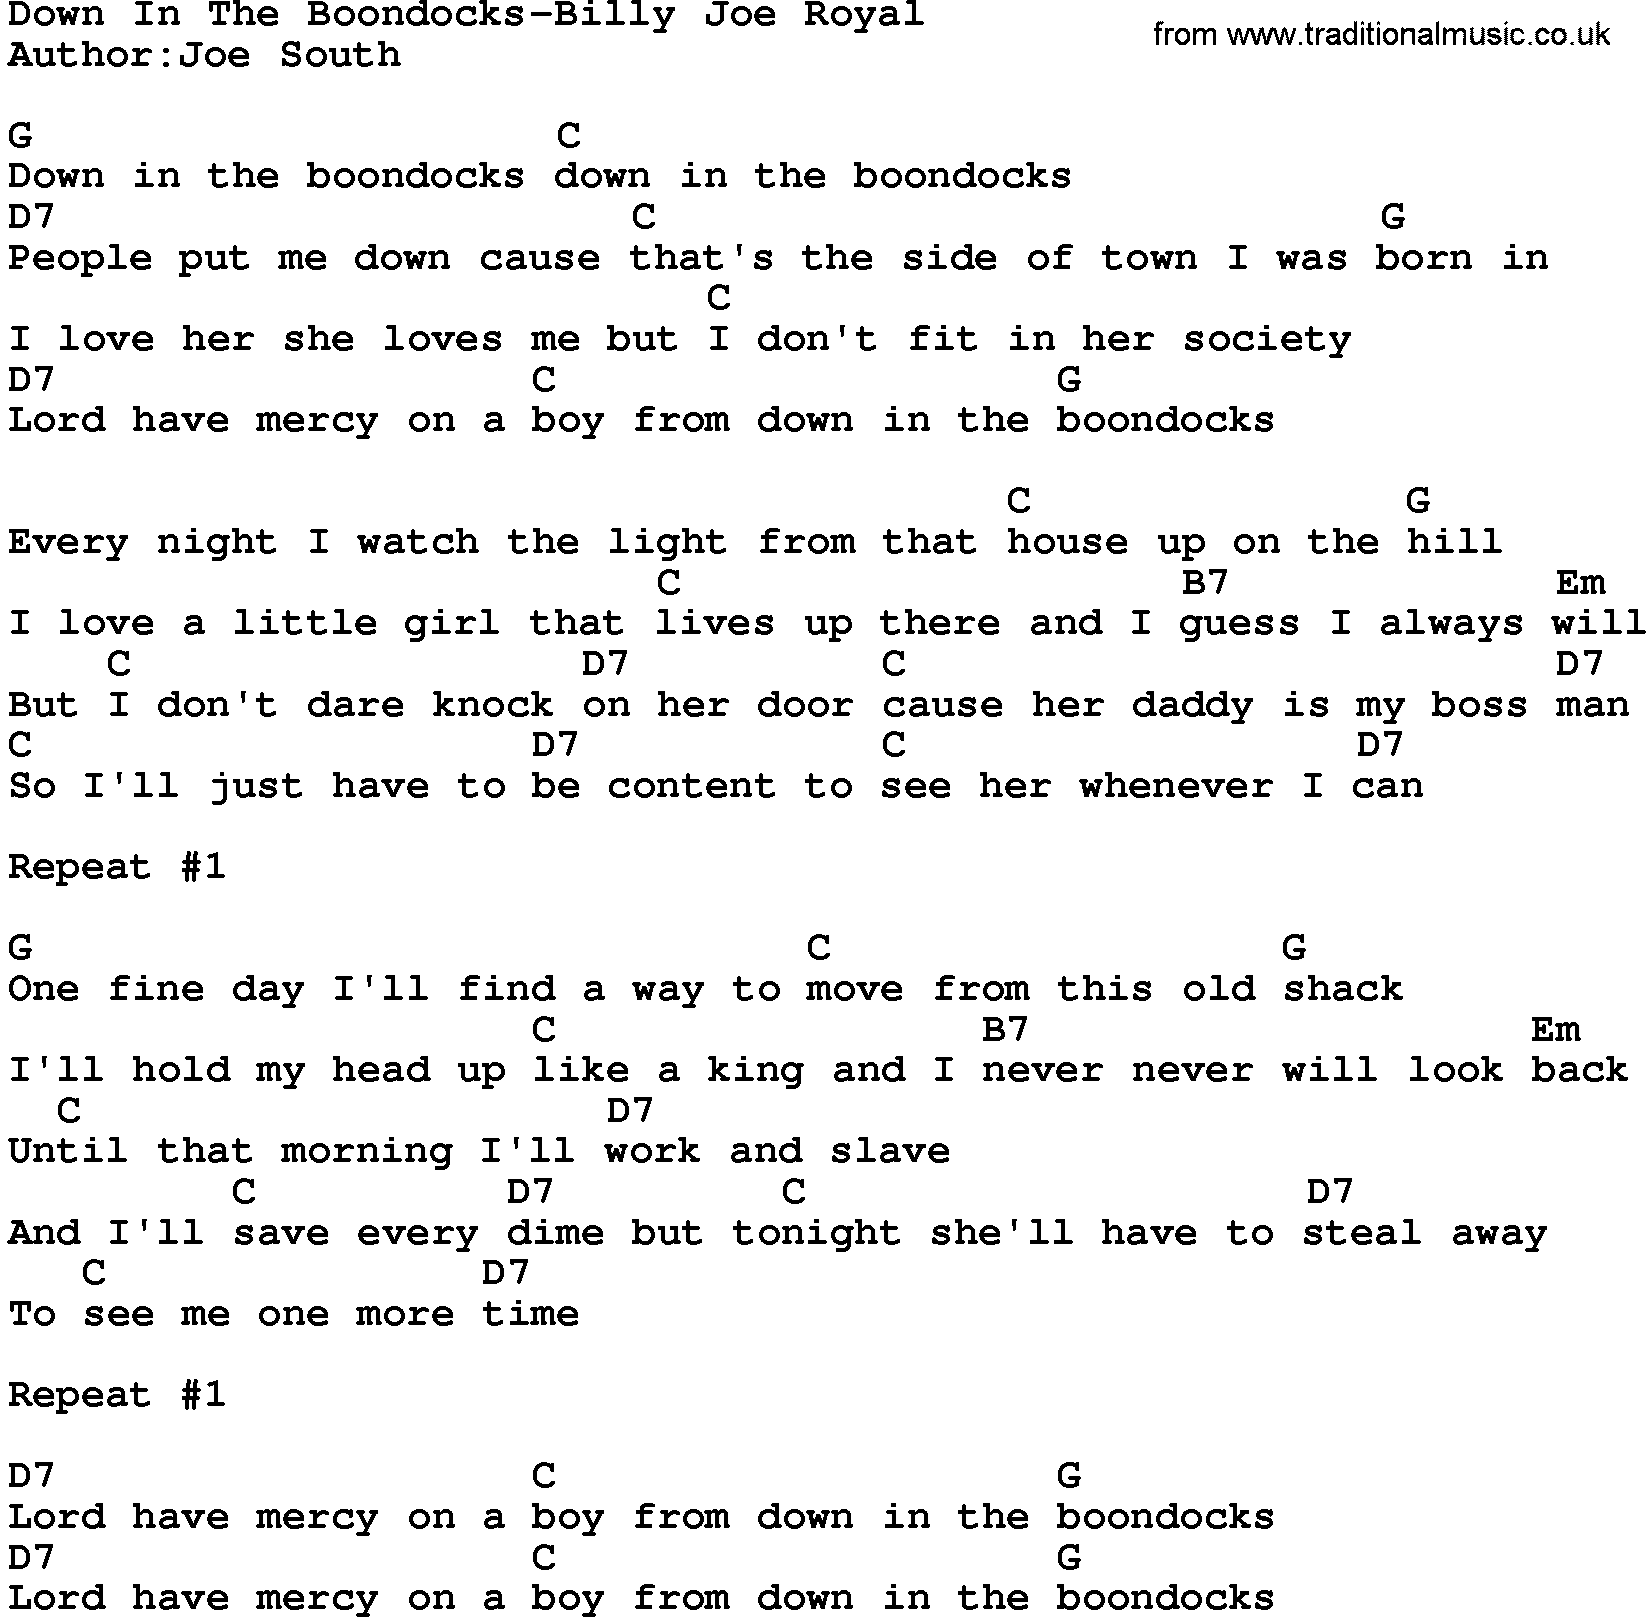 Country music song: Down In The Boondocks-Billy Joe Royal lyrics and chords